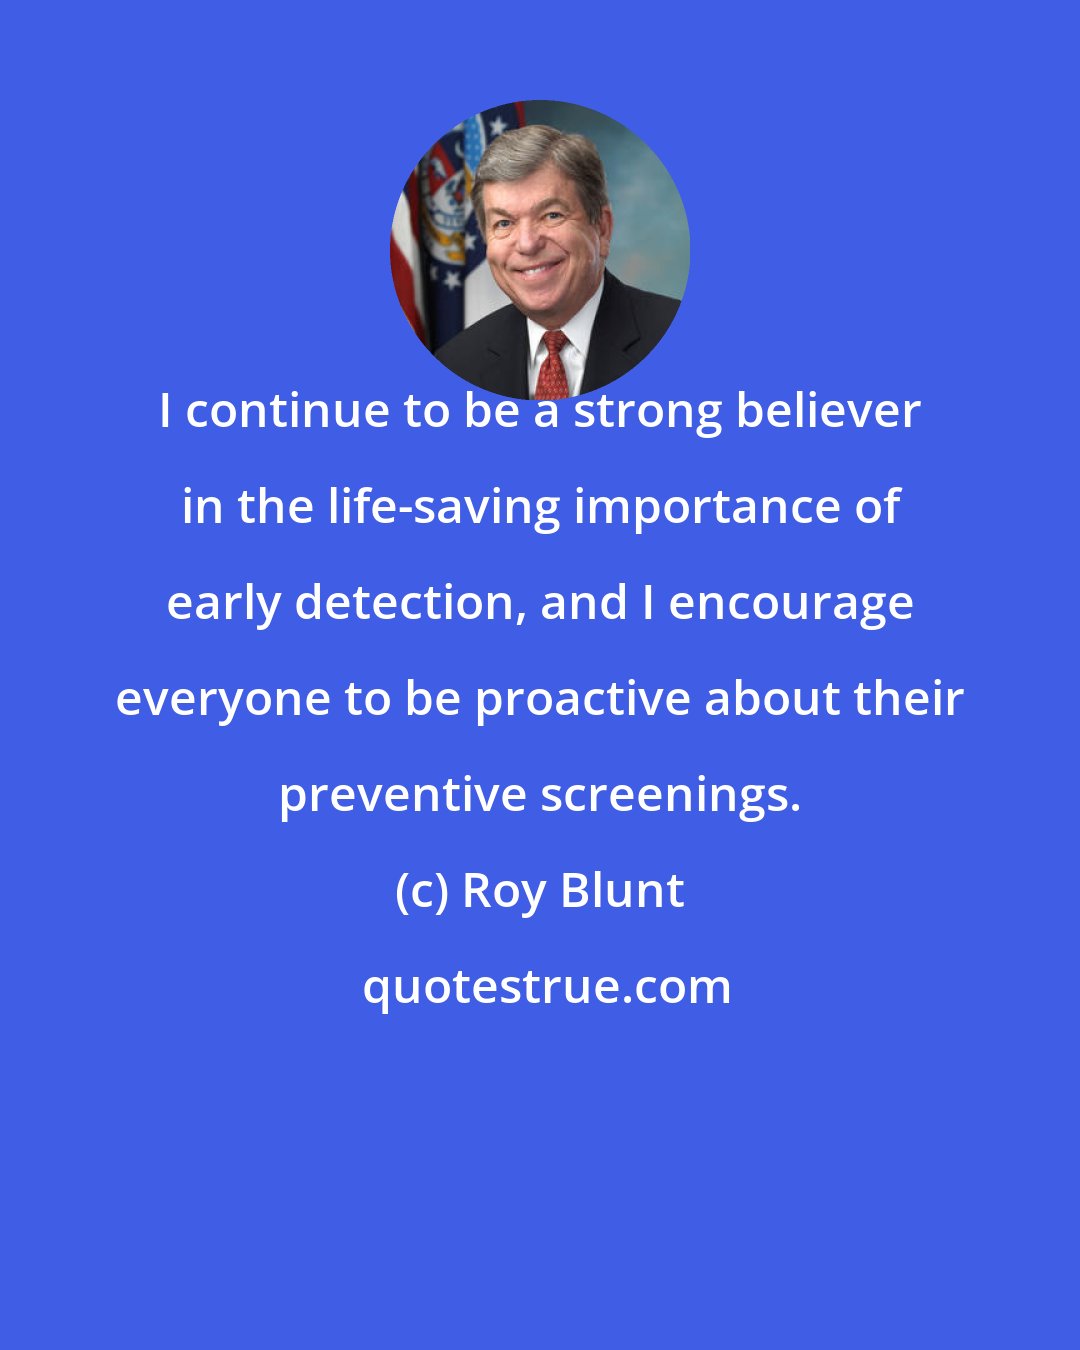 Roy Blunt: I continue to be a strong believer in the life-saving importance of early detection, and I encourage everyone to be proactive about their preventive screenings.